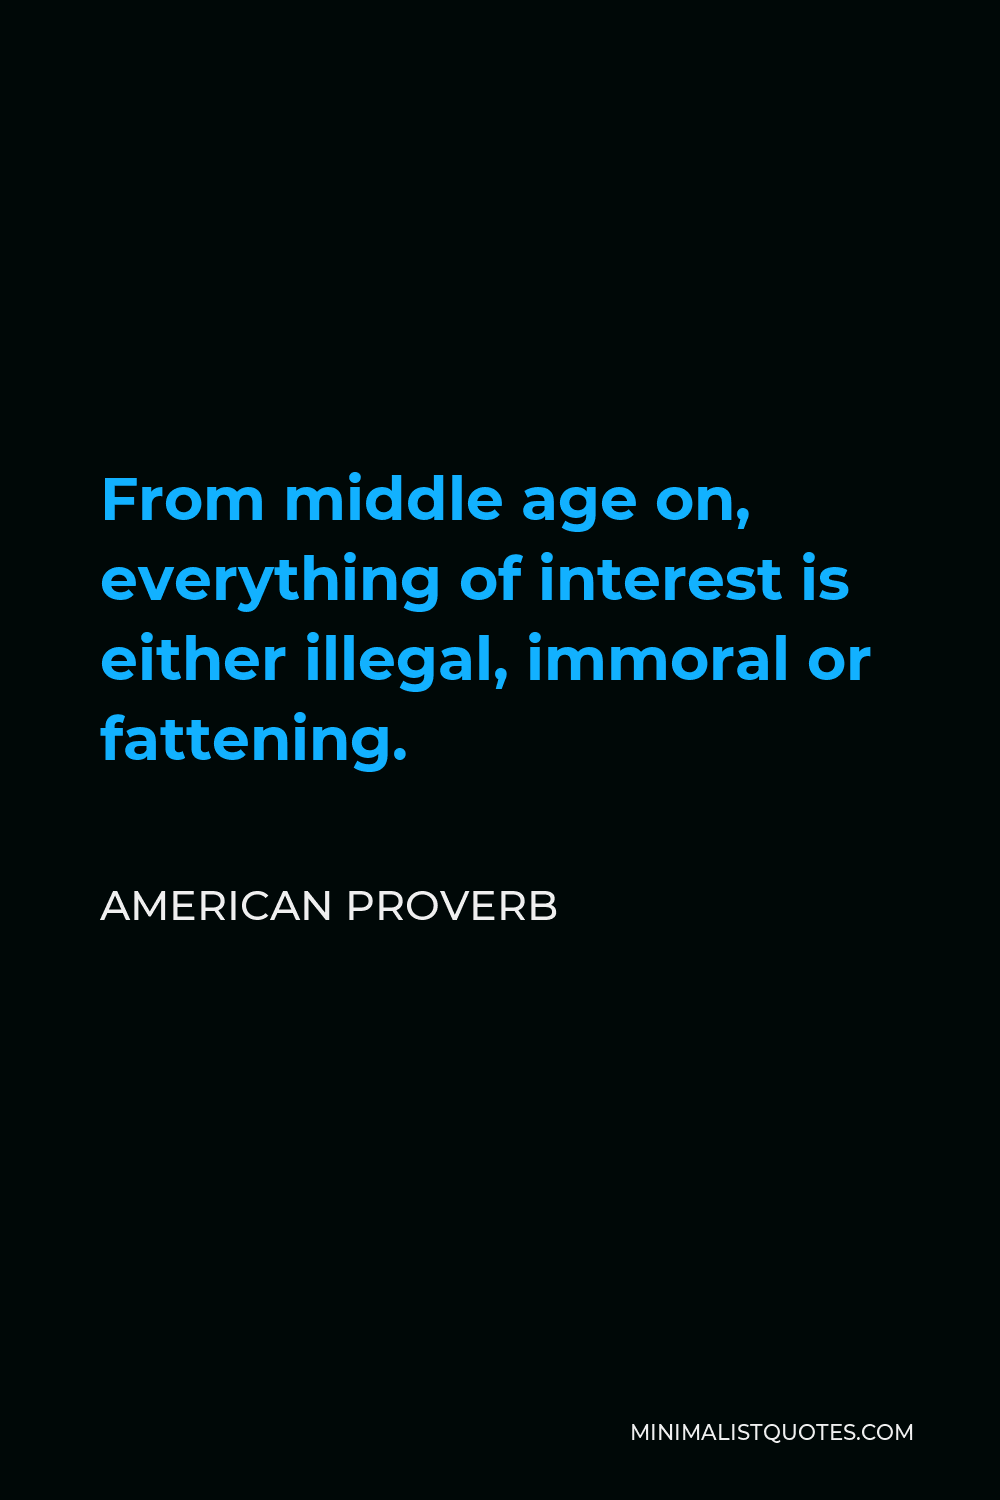 American Proverb Quote - From middle age on, everything of interest is either illegal, immoral or fattening.